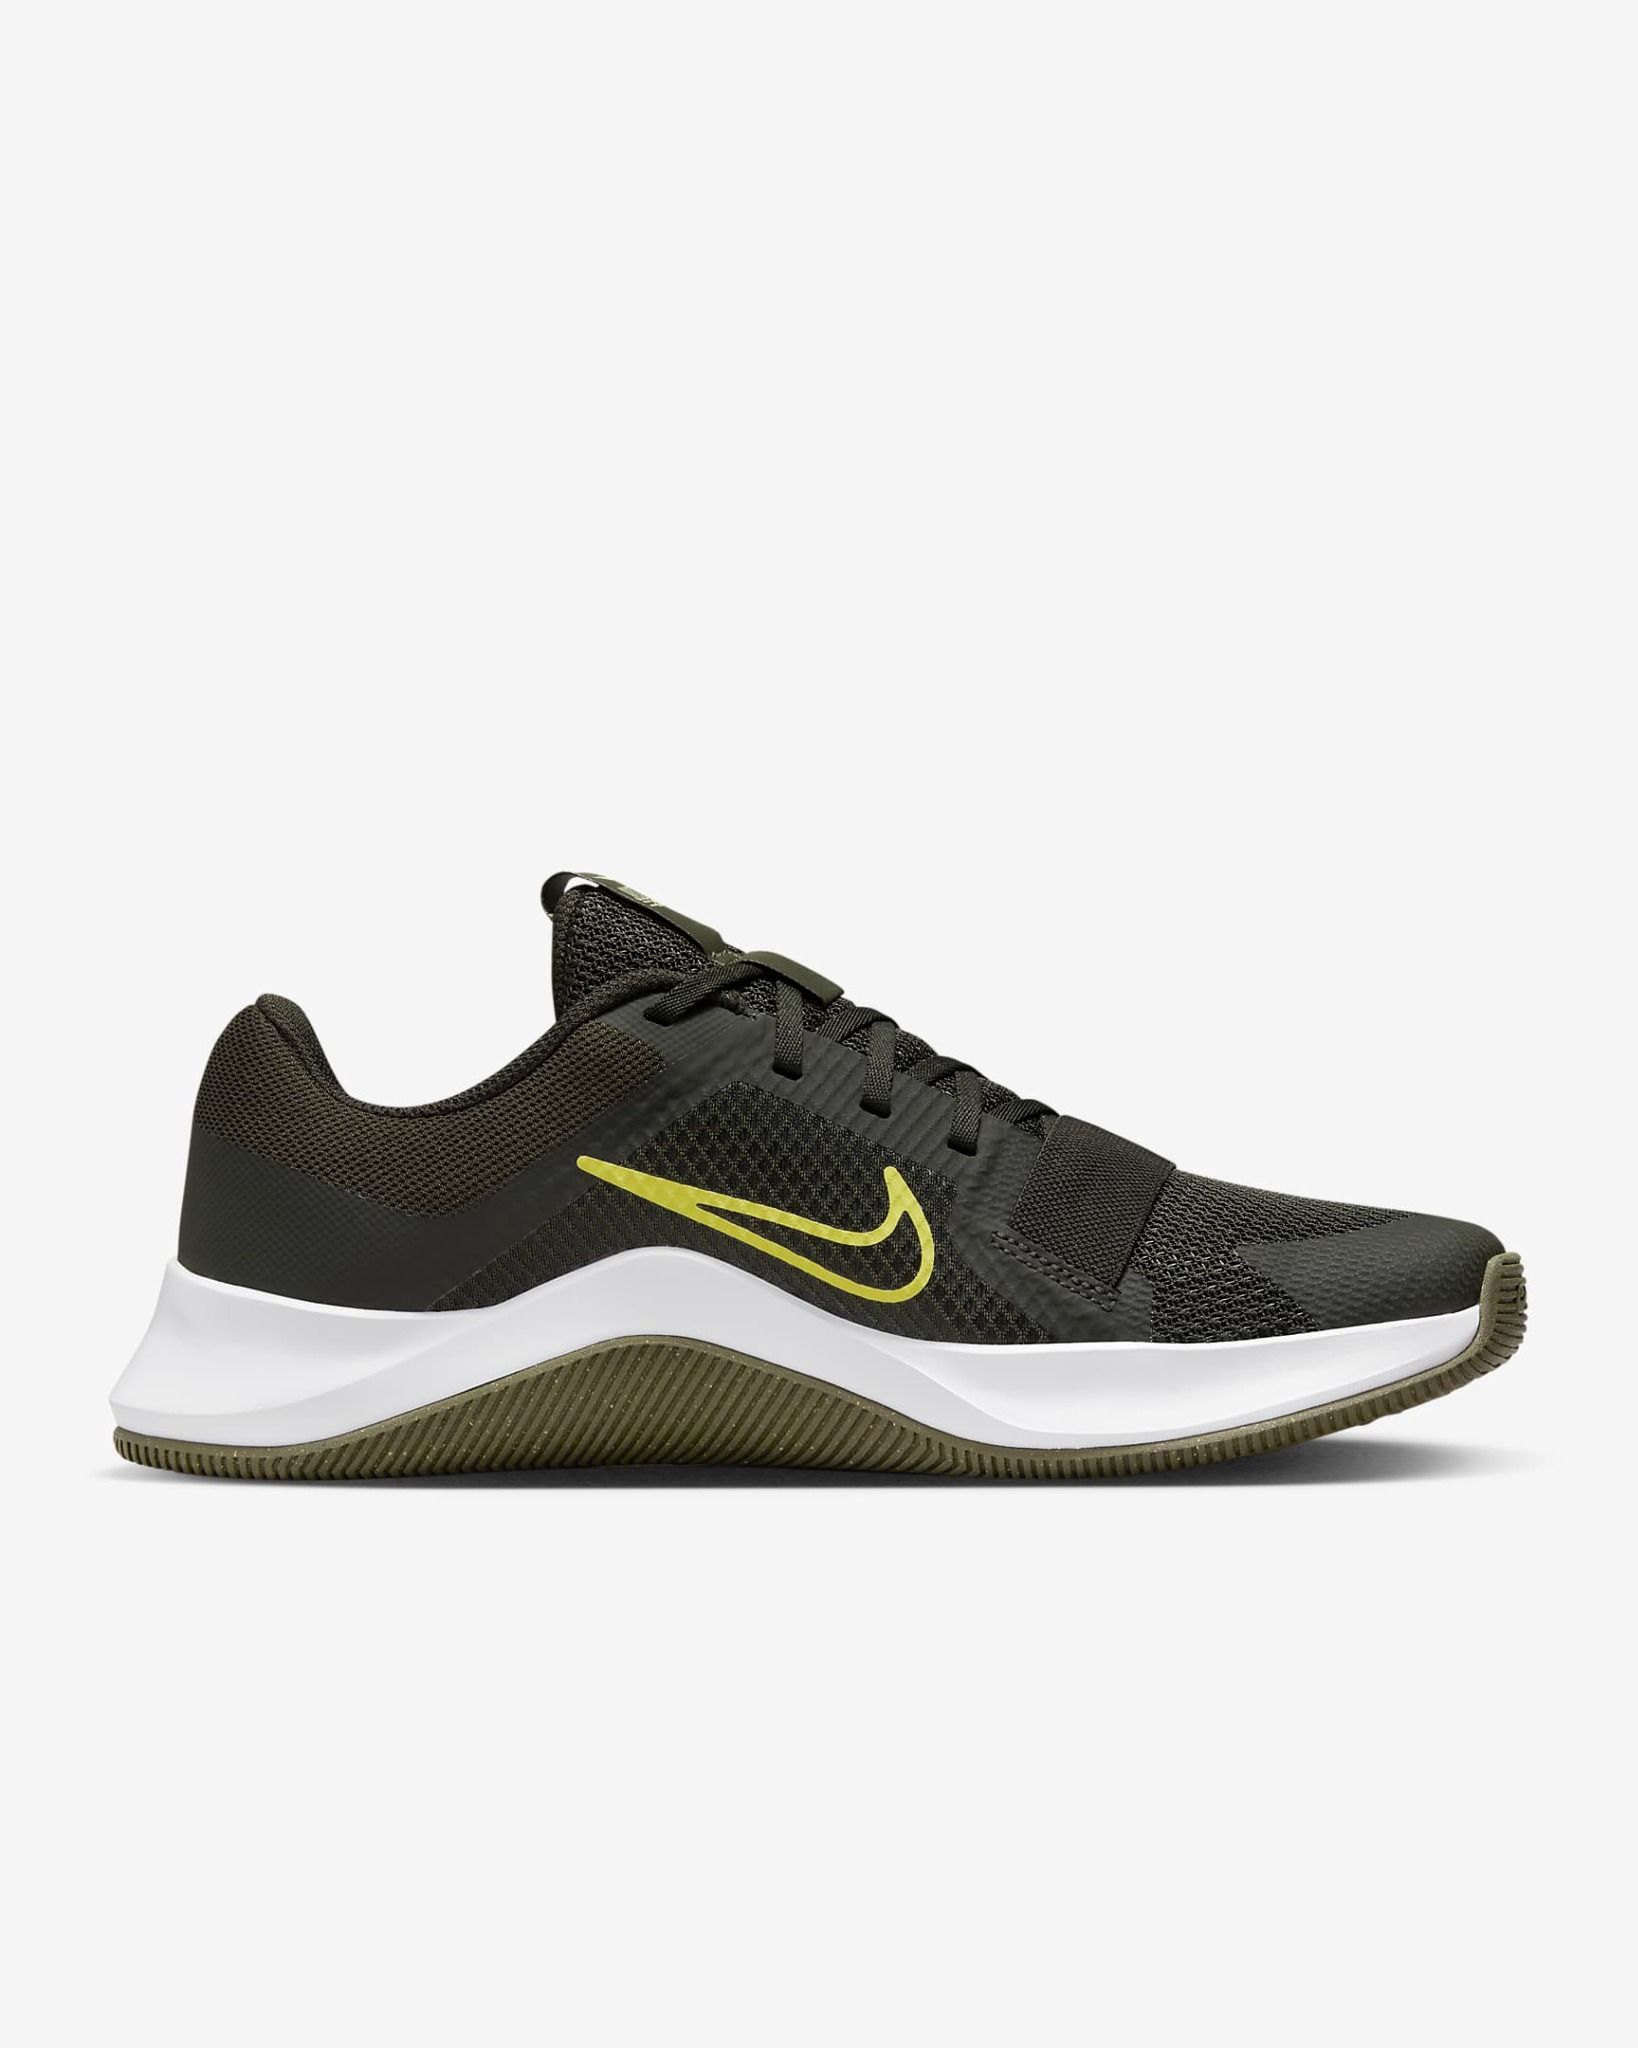 Nike - Giày luyện tập thể thao Nam MC Trainer 2 Men's Workout Shoes